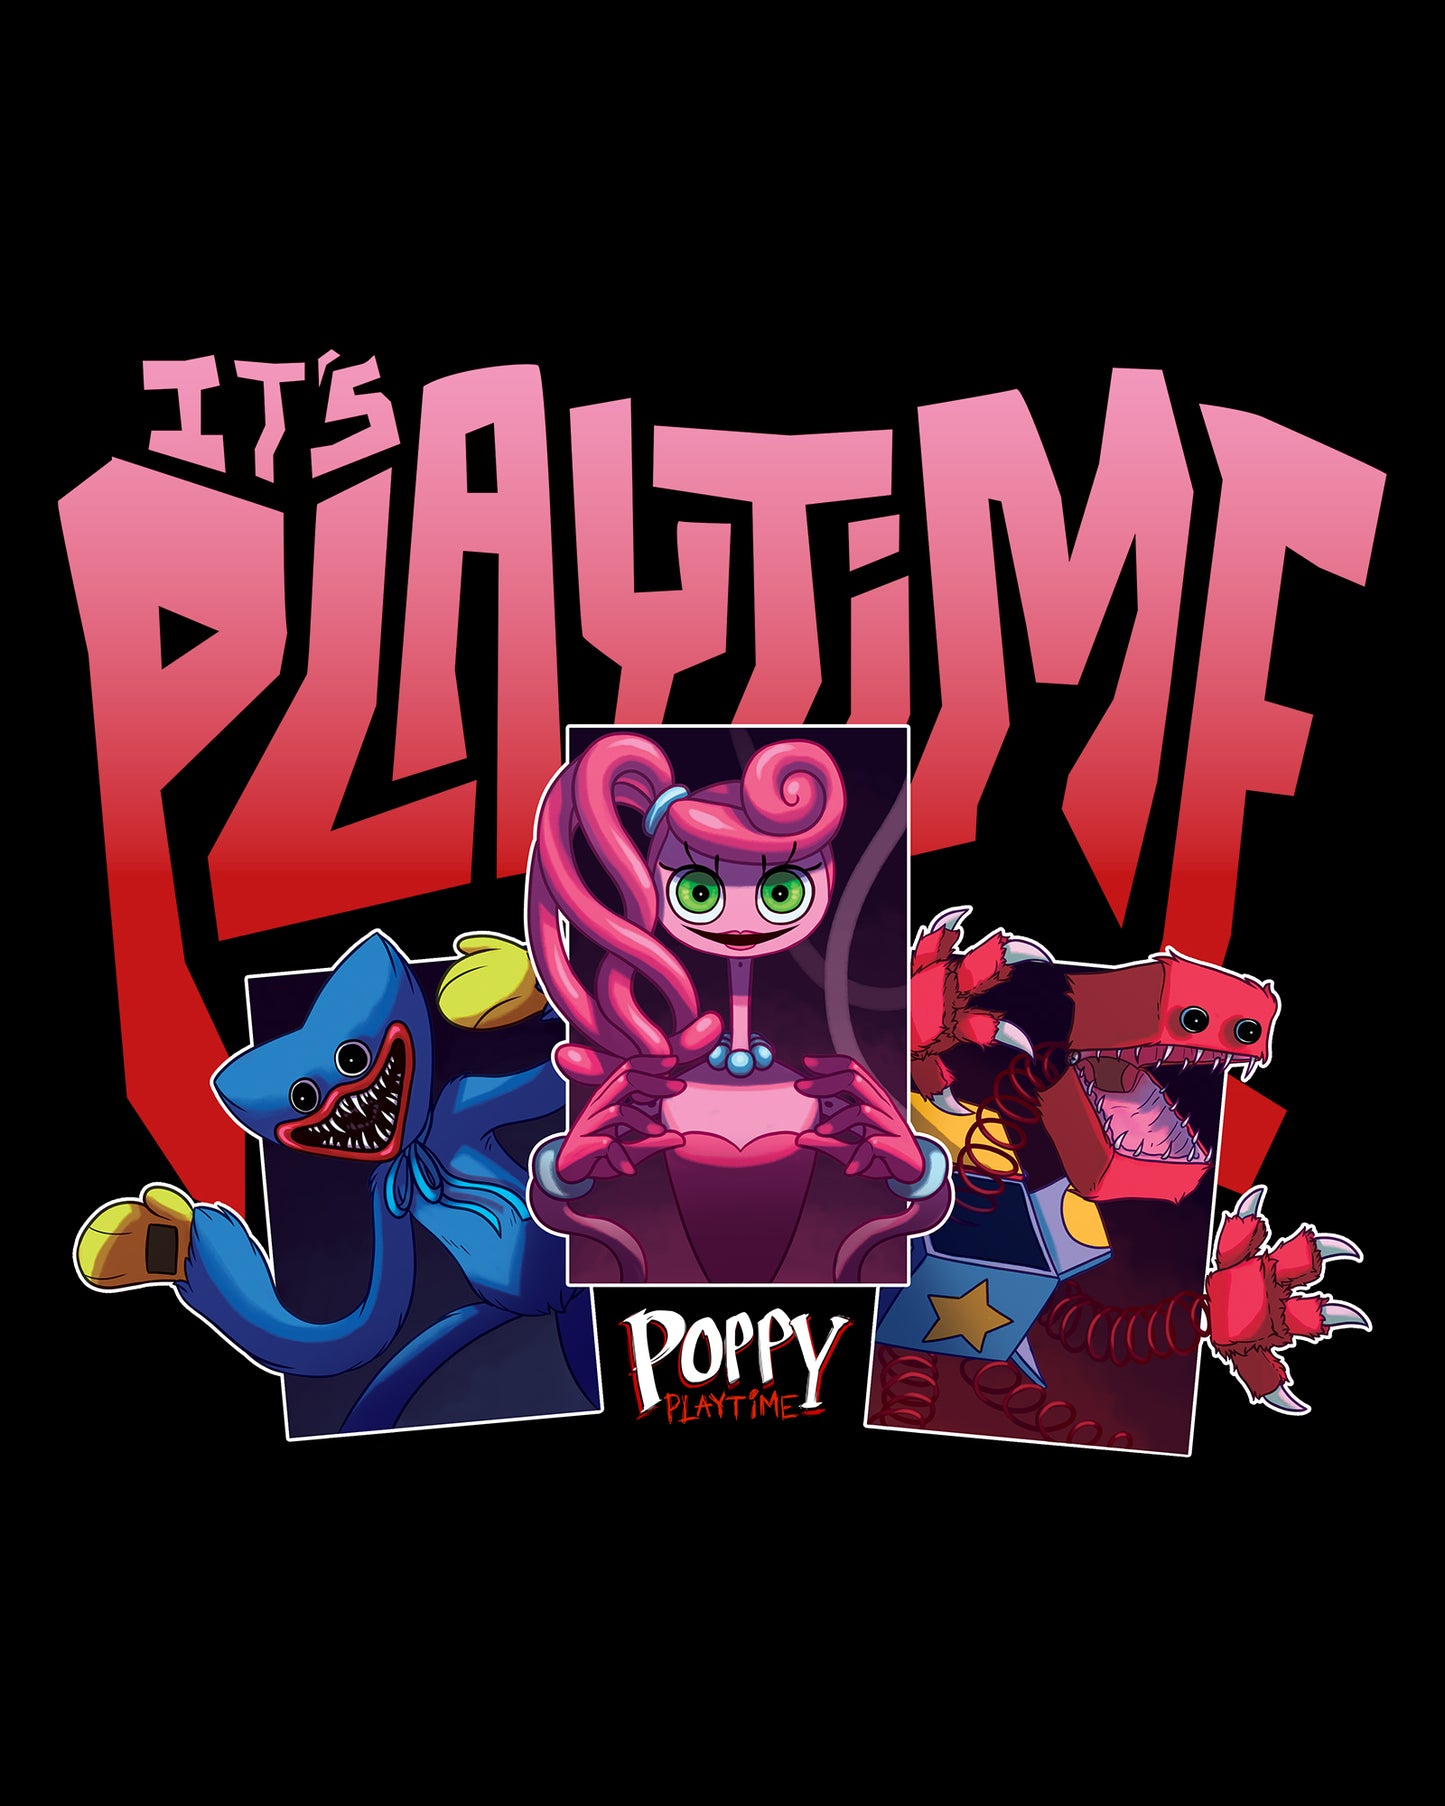 image on shirt: scary huggy wuggy, mommy long legs, and scary boxy boo. text: it's playtime poppy playtime.